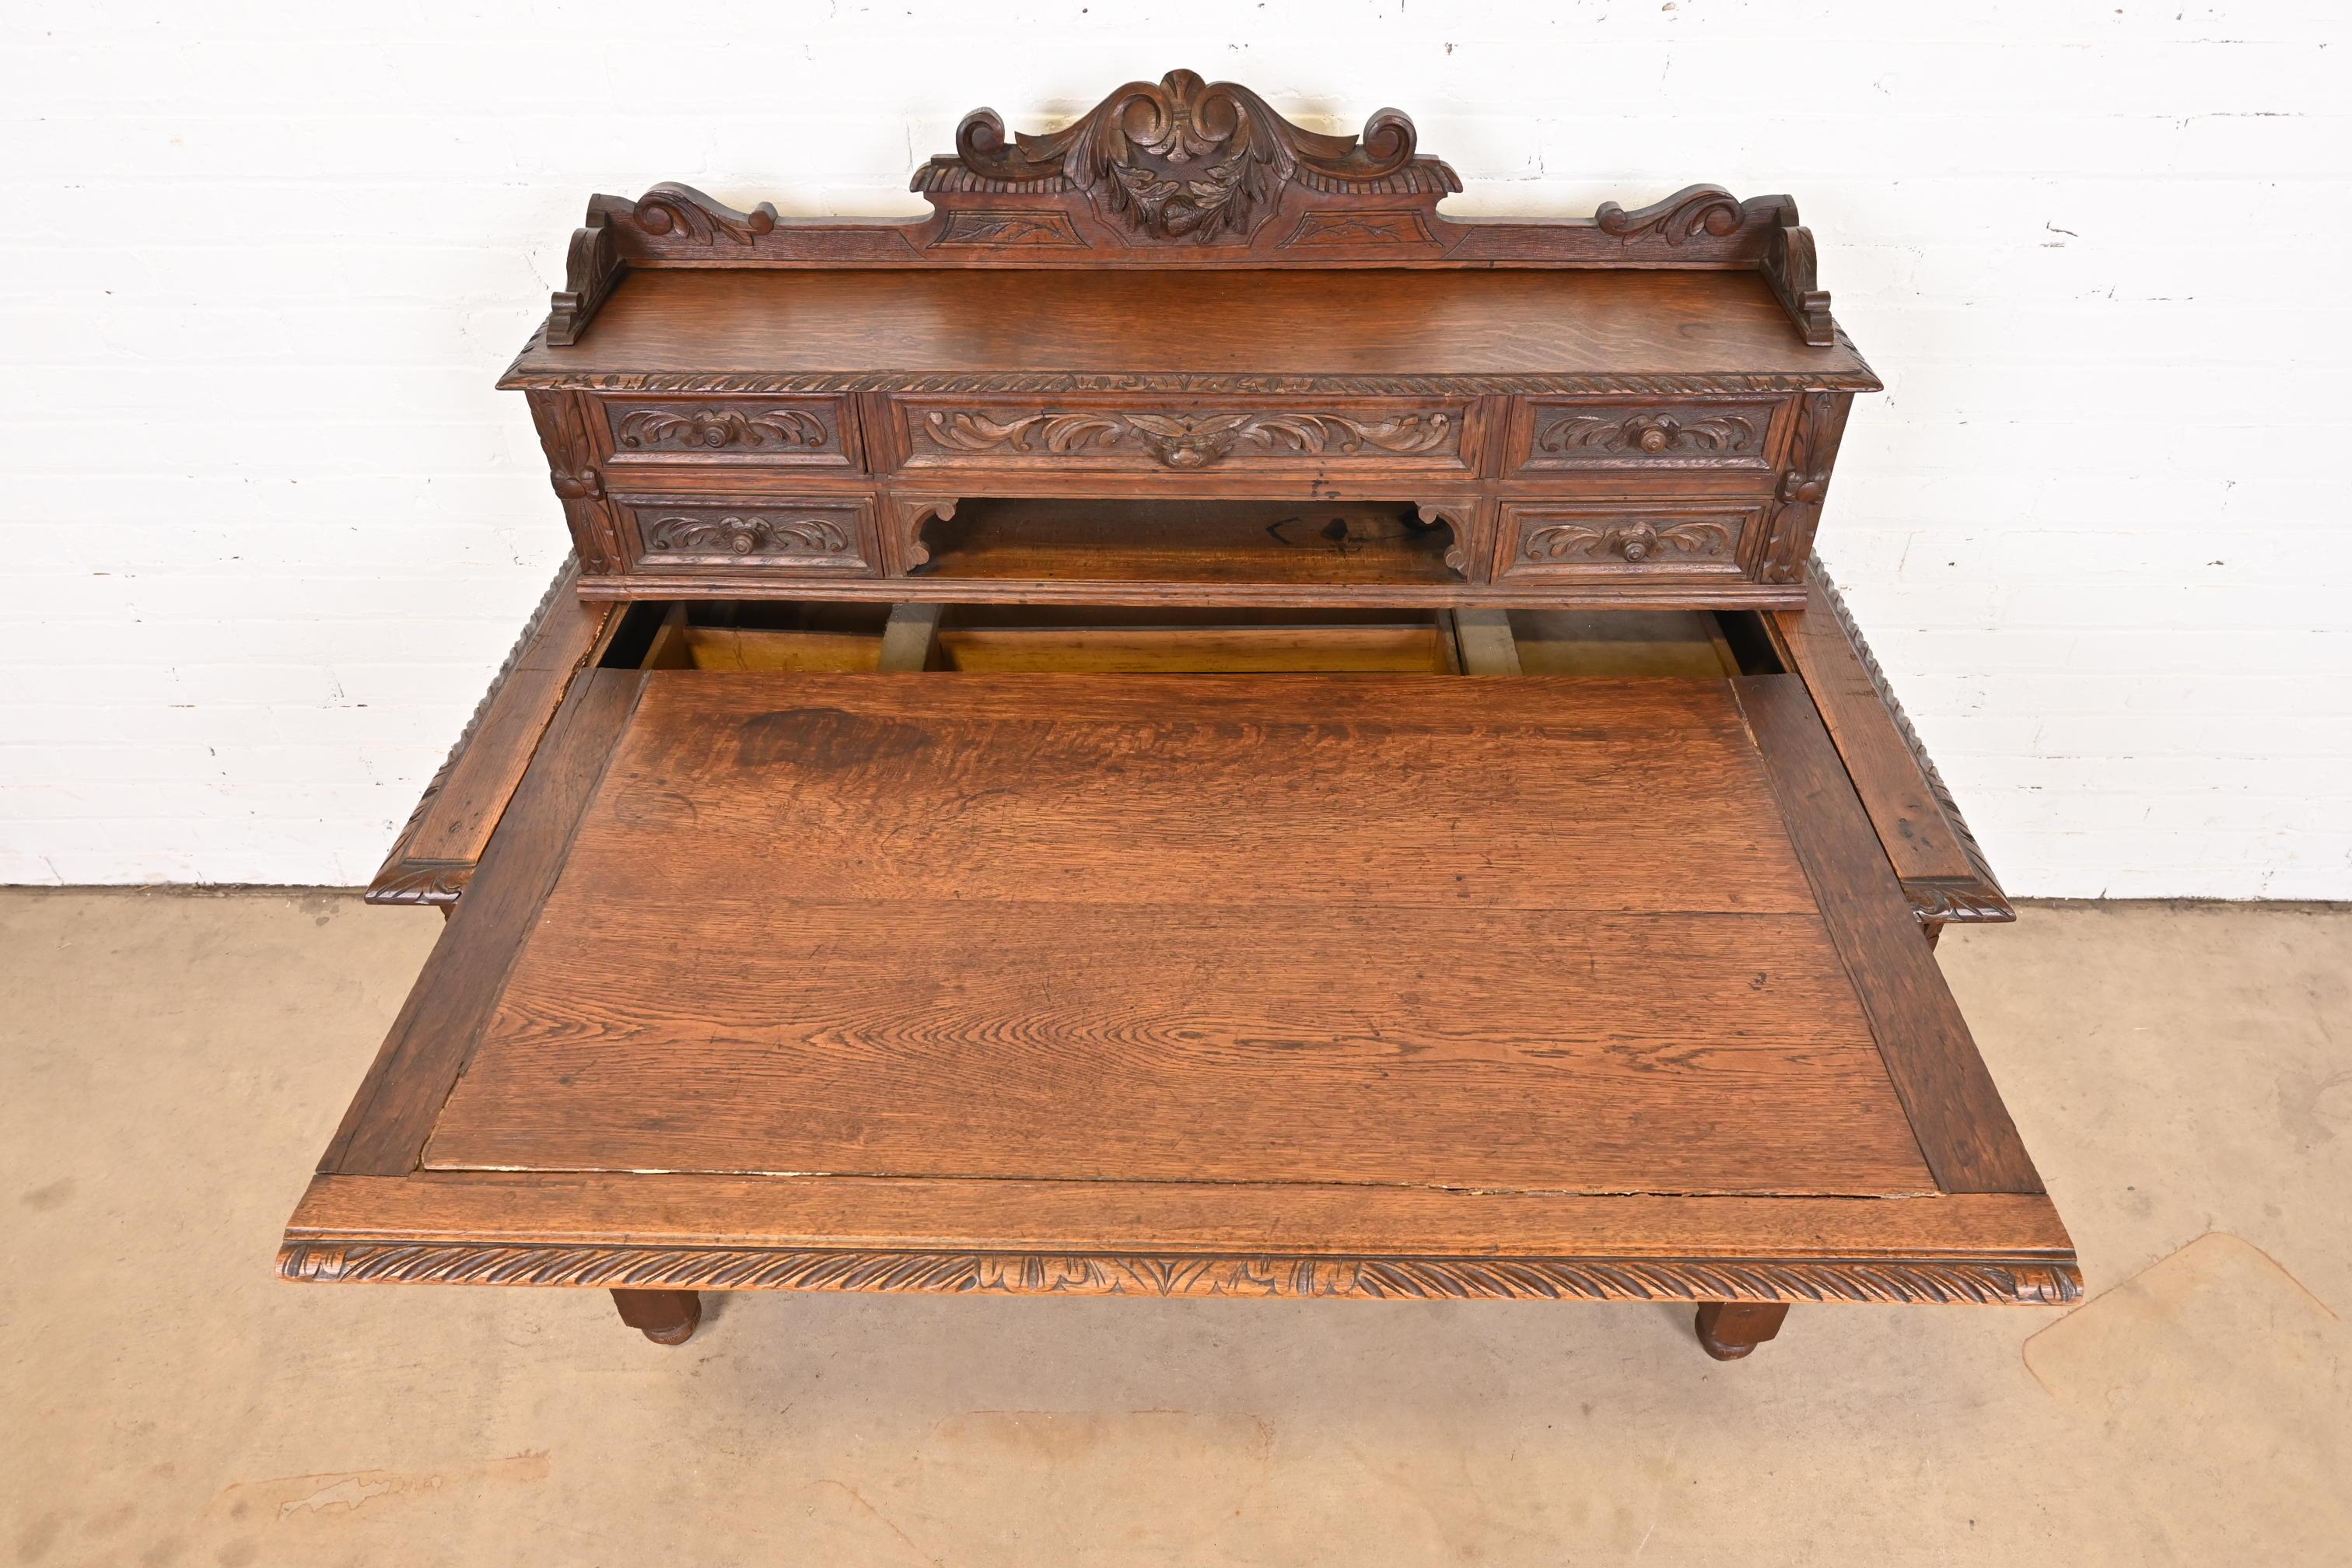 19th Century French Black Forest Carved Oak Writing Desk With Barley Twist Legs For Sale 5